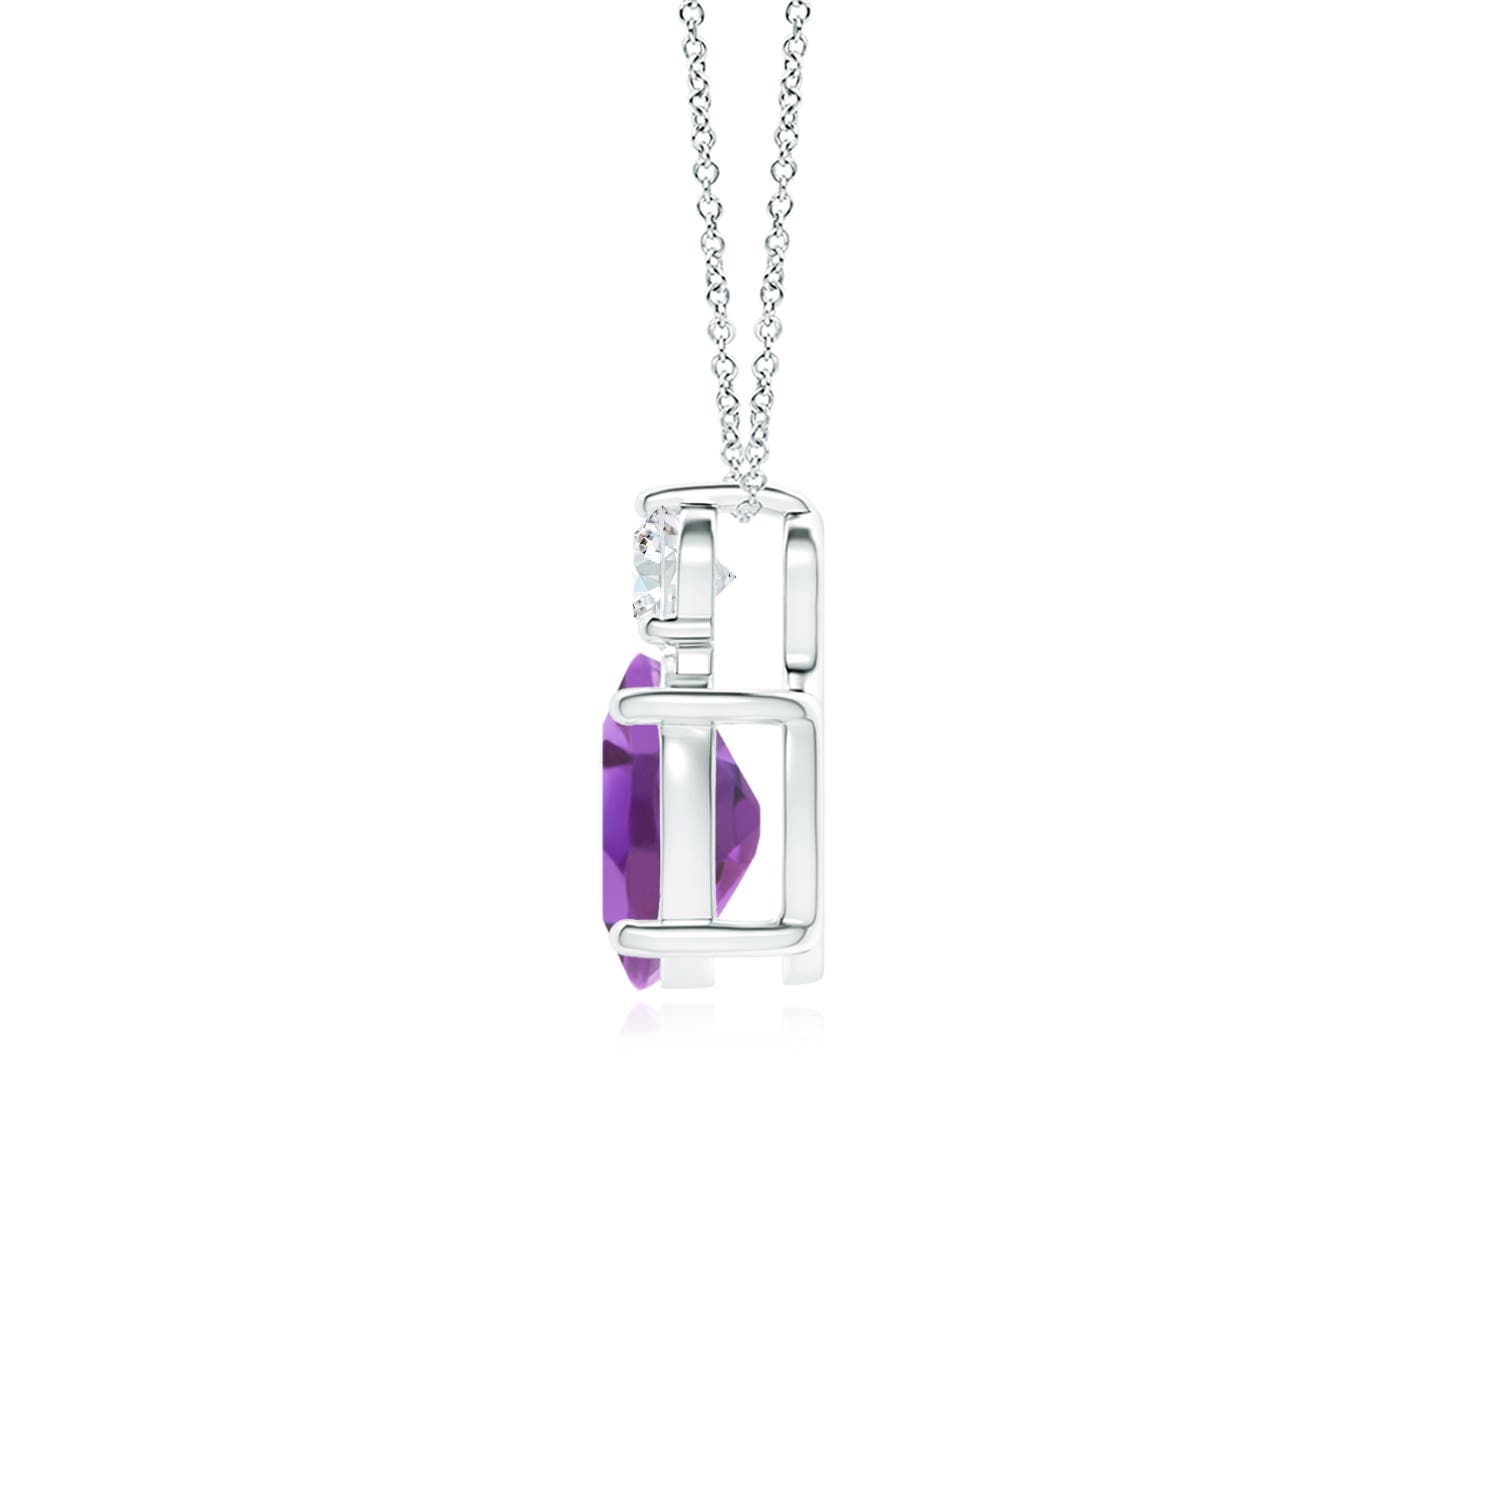 A - Amethyst / 1.31 CT / 14 KT White Gold